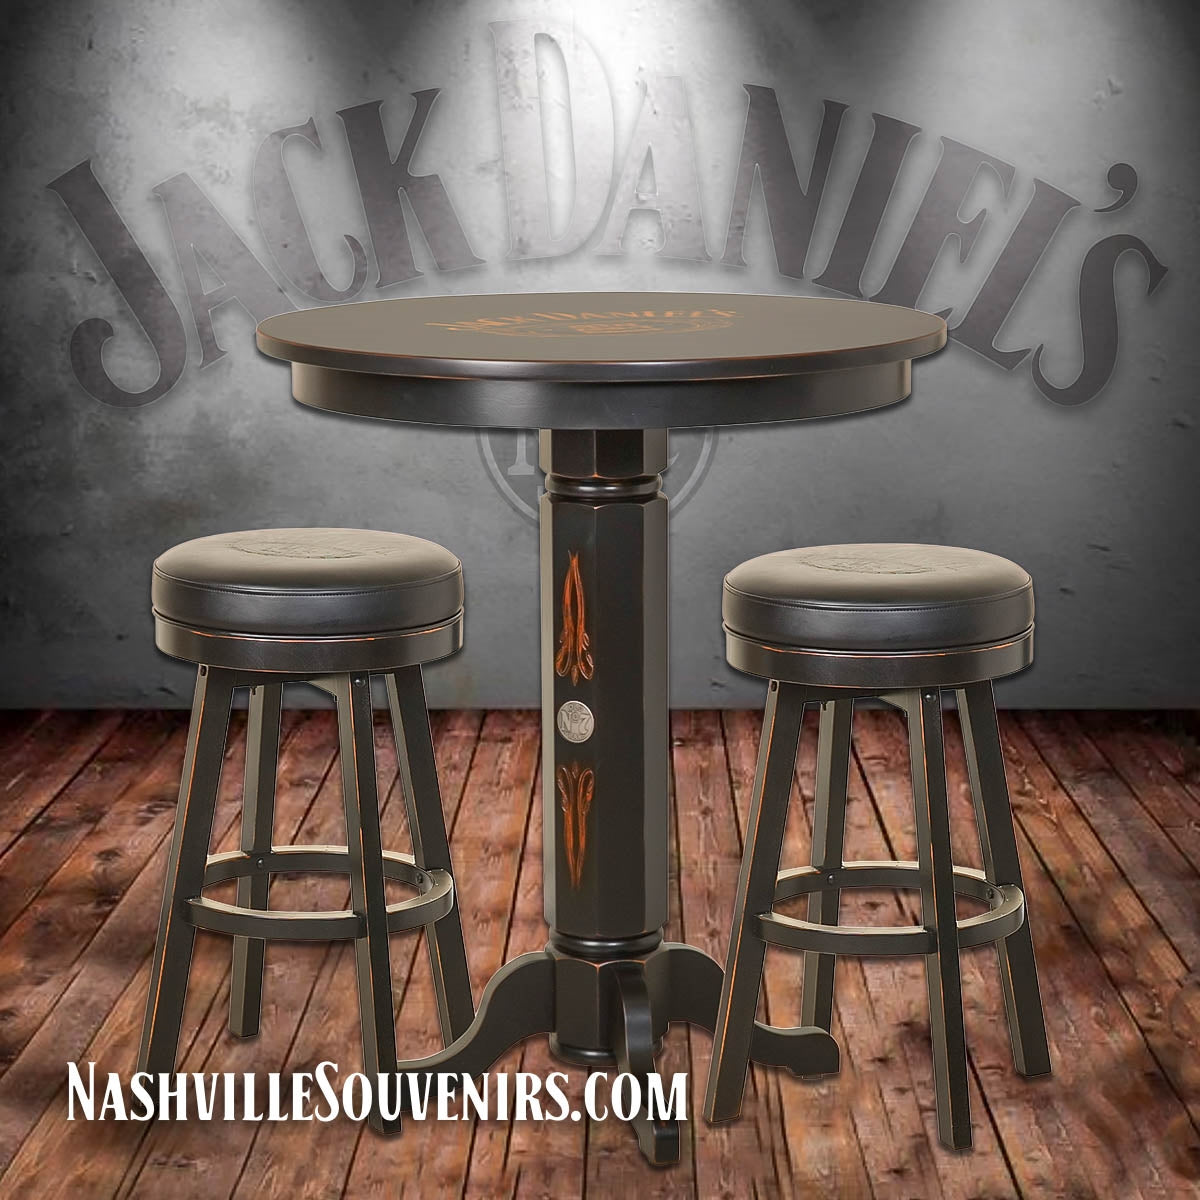 This officially licensed Jack Daniel's bar table table and stool set is a great addition to your home bar.  The Tennessee charcoal finish on the Jack Daniel's bar table adds some Jack Daniel's class to your home bar or rec room. The table features a pedestal base with four contoured feet. The base boasts Old No.7 Brand pewter medallions.